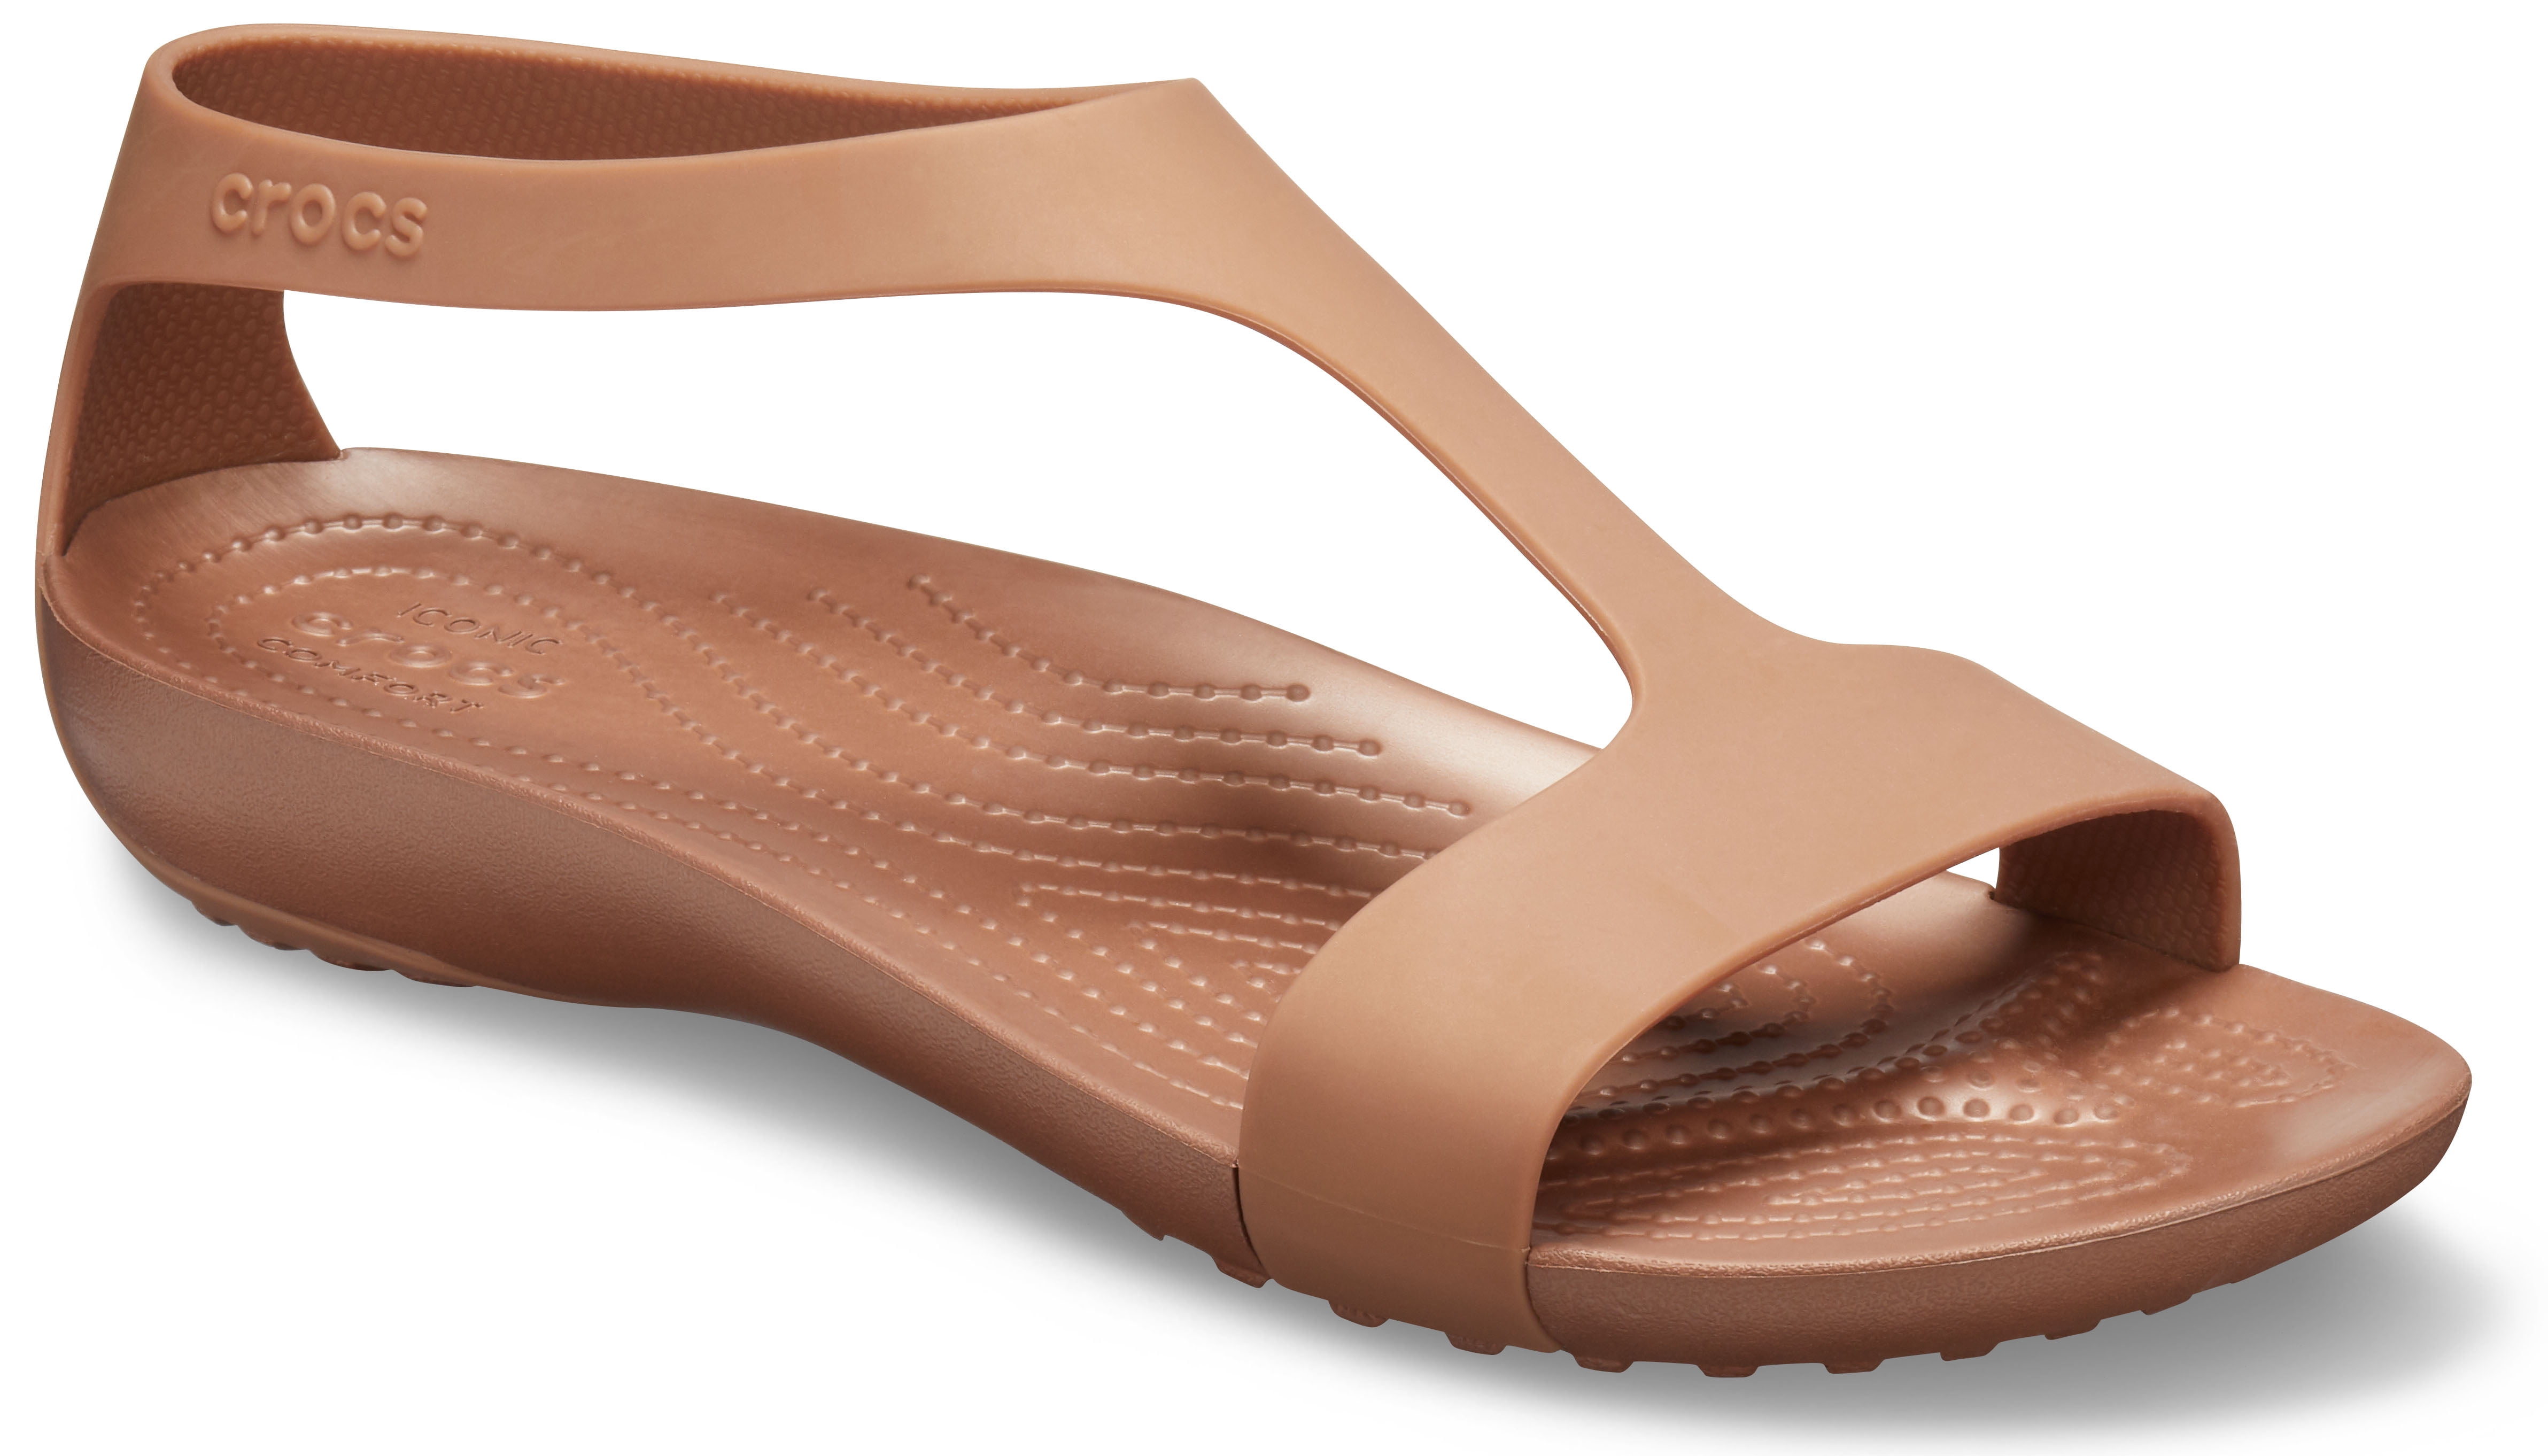 Crocs Serena Slide Ladies Sandal in Various Colours and Sizes 